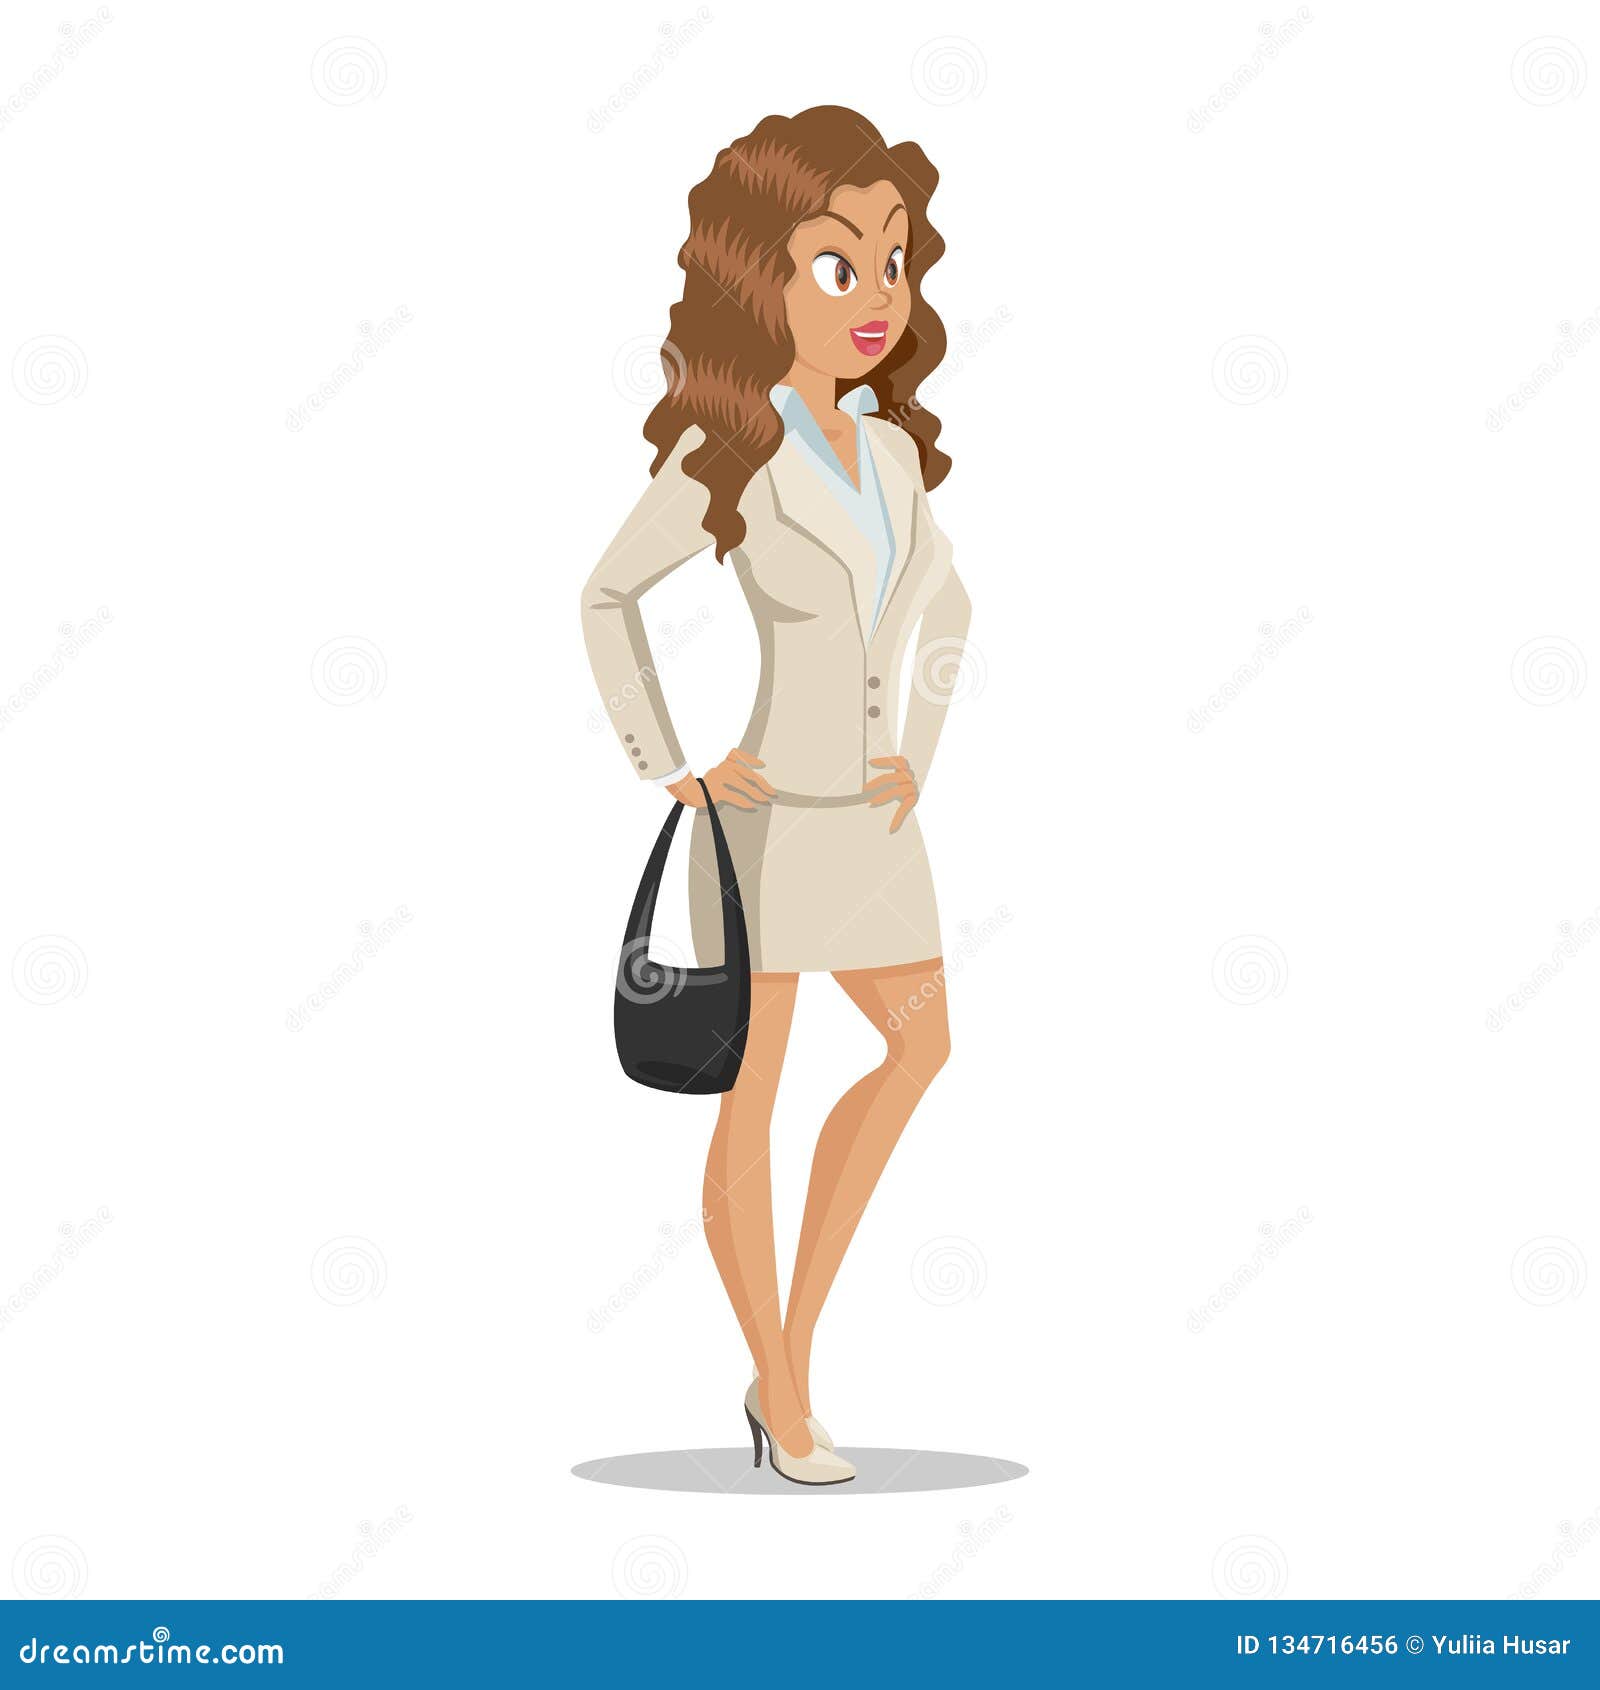 Attractive Young Women in Elegant Office Clothes. Cute Cartoon Girl with a  Black Bag in Hand. Business Girl Stock Vector - Illustration of fashion,  elegant: 134716456